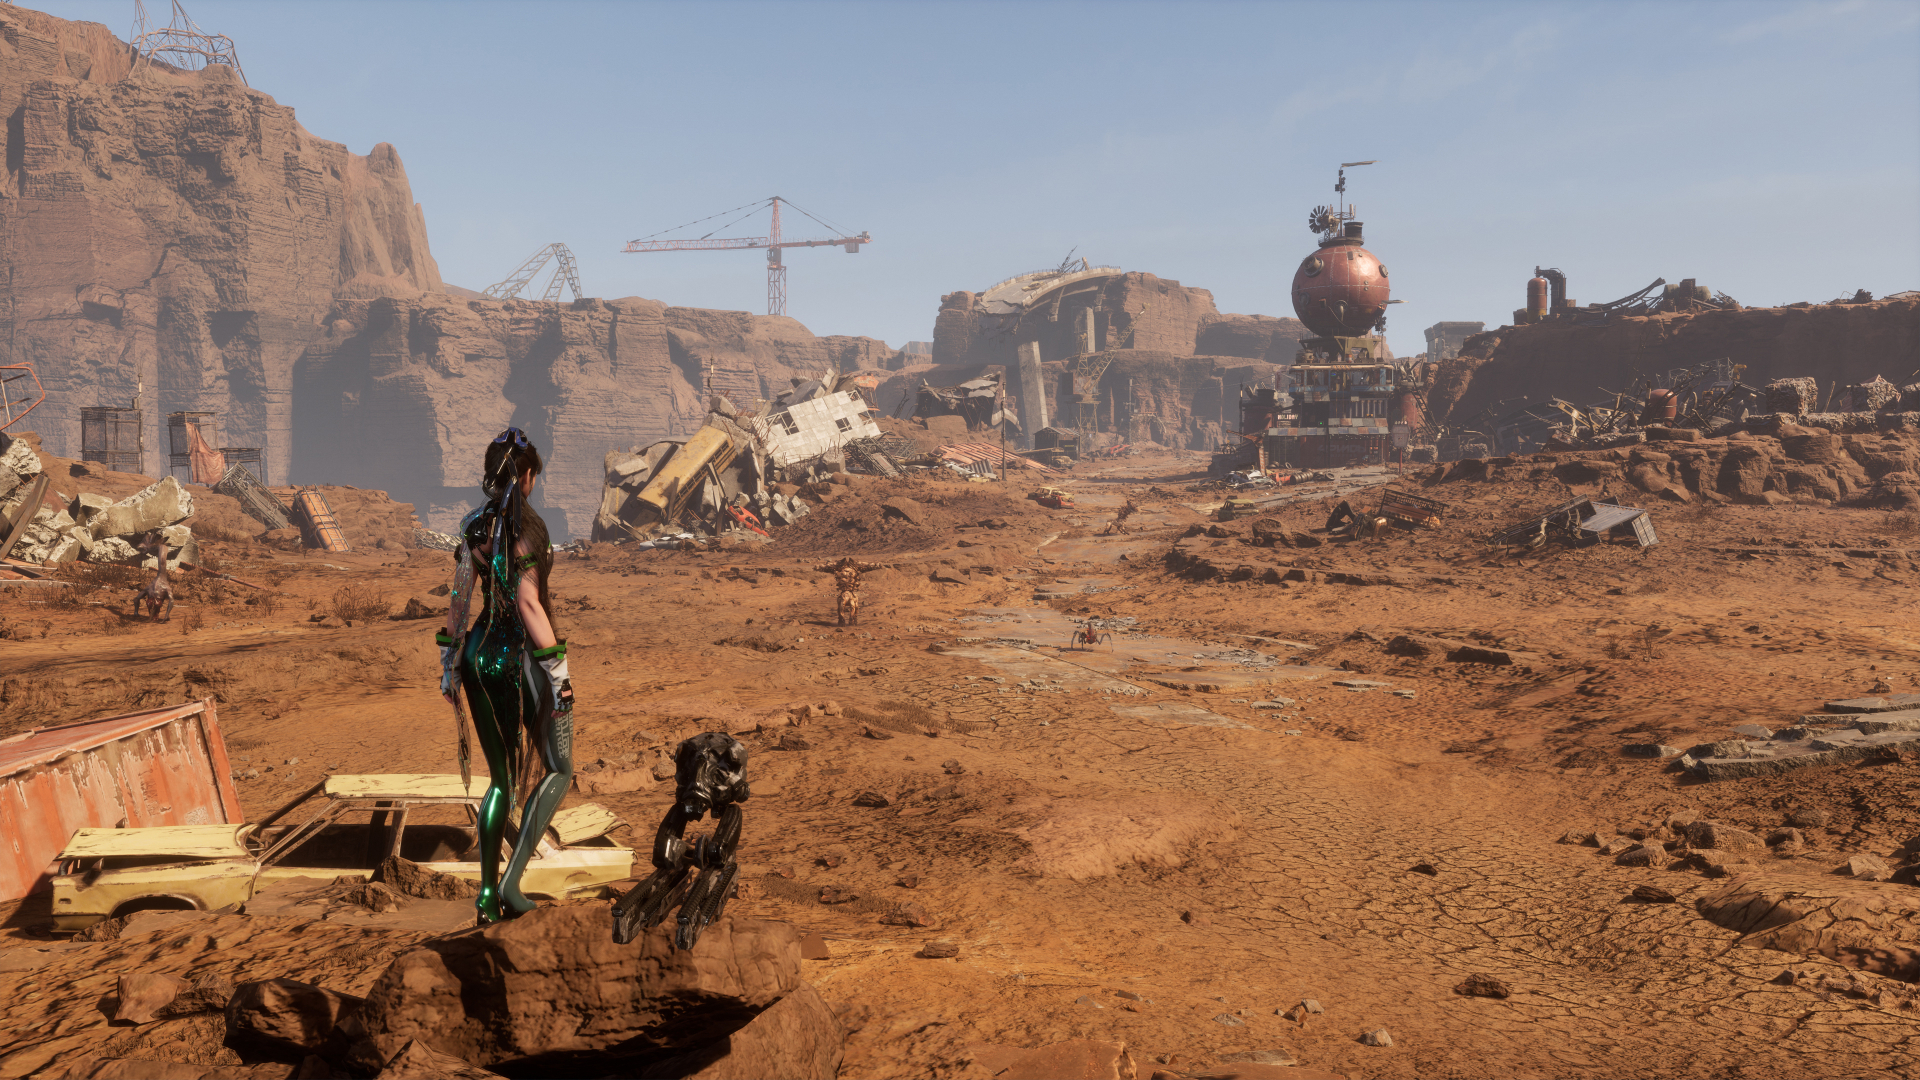 Stellar Blade: EVE and her drone look across the dangerous wasteland